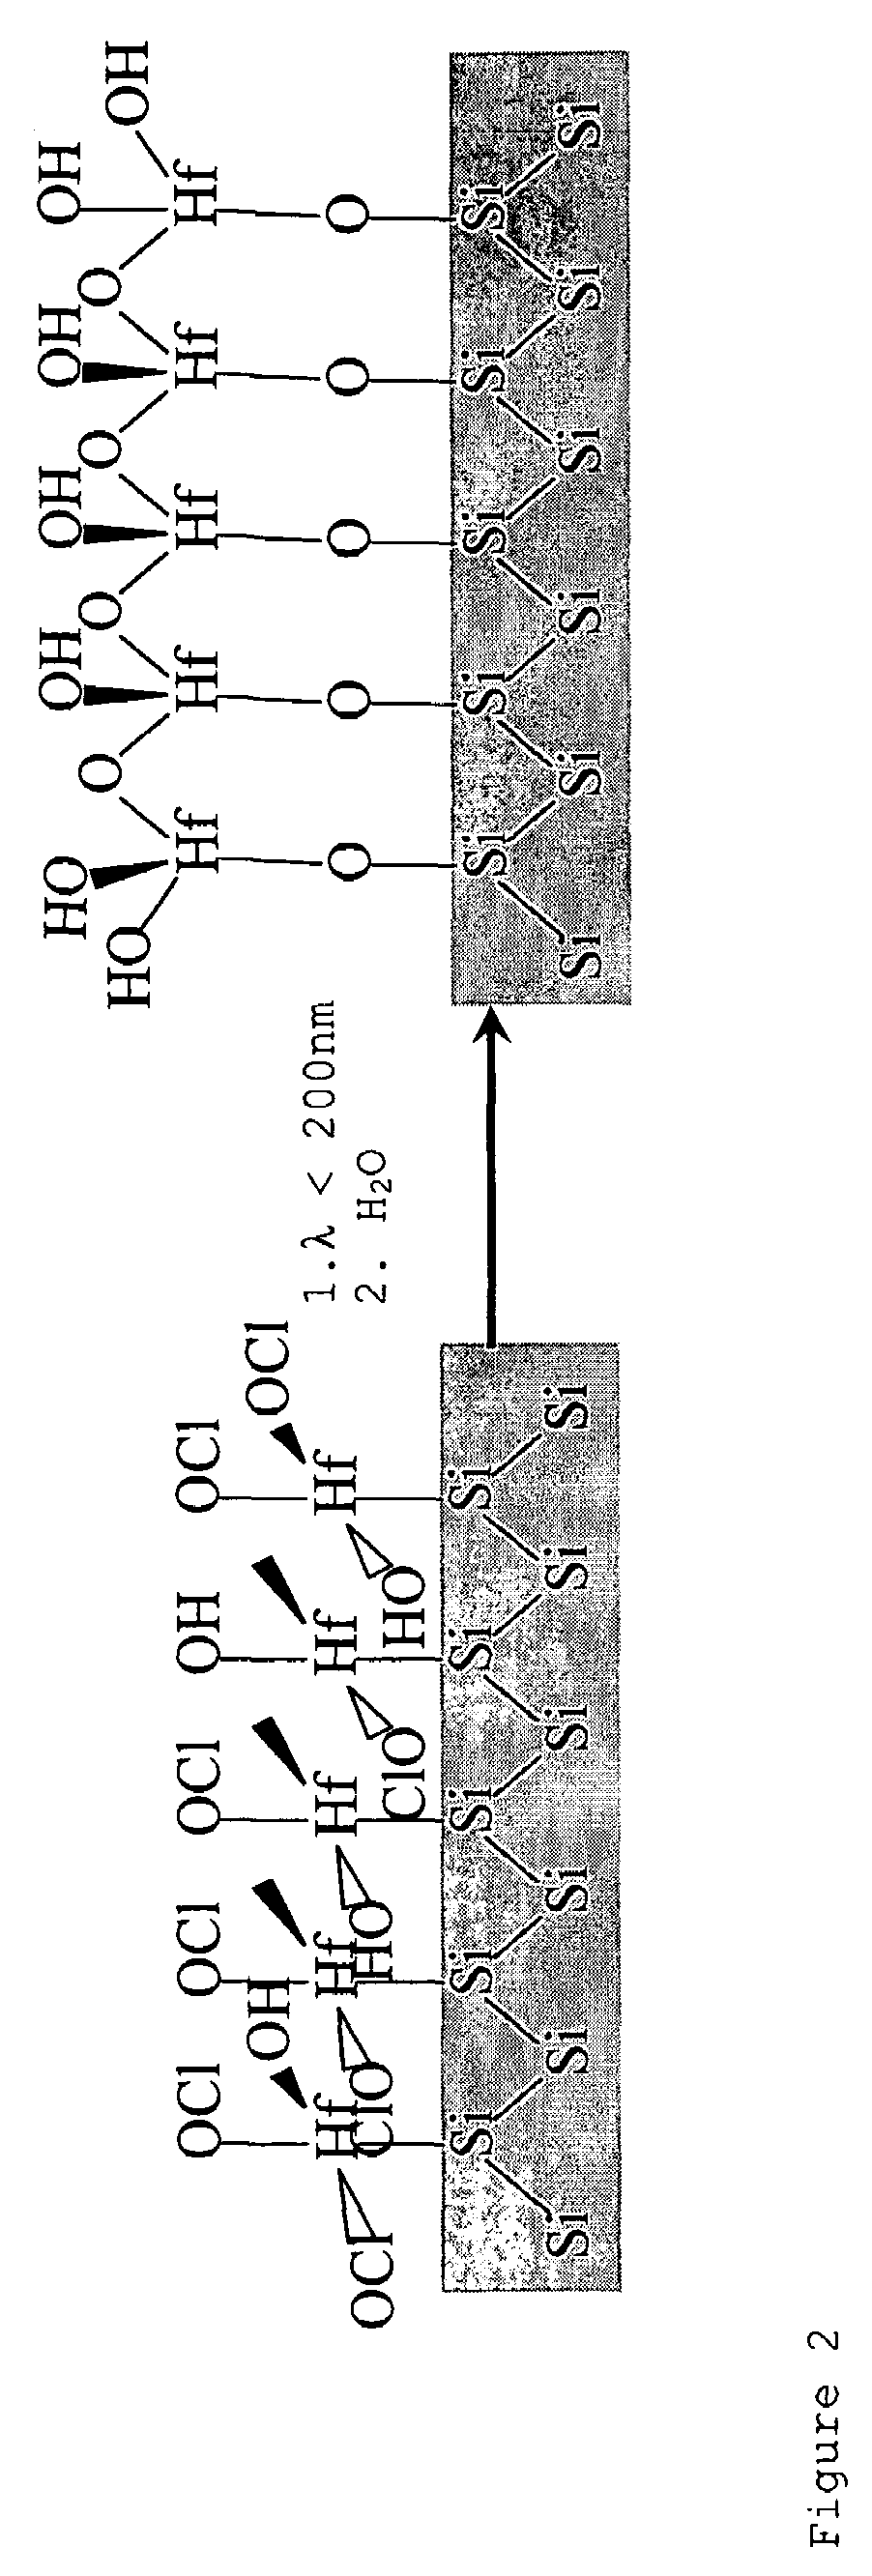 Atomic layer deposition method for depositing a layer